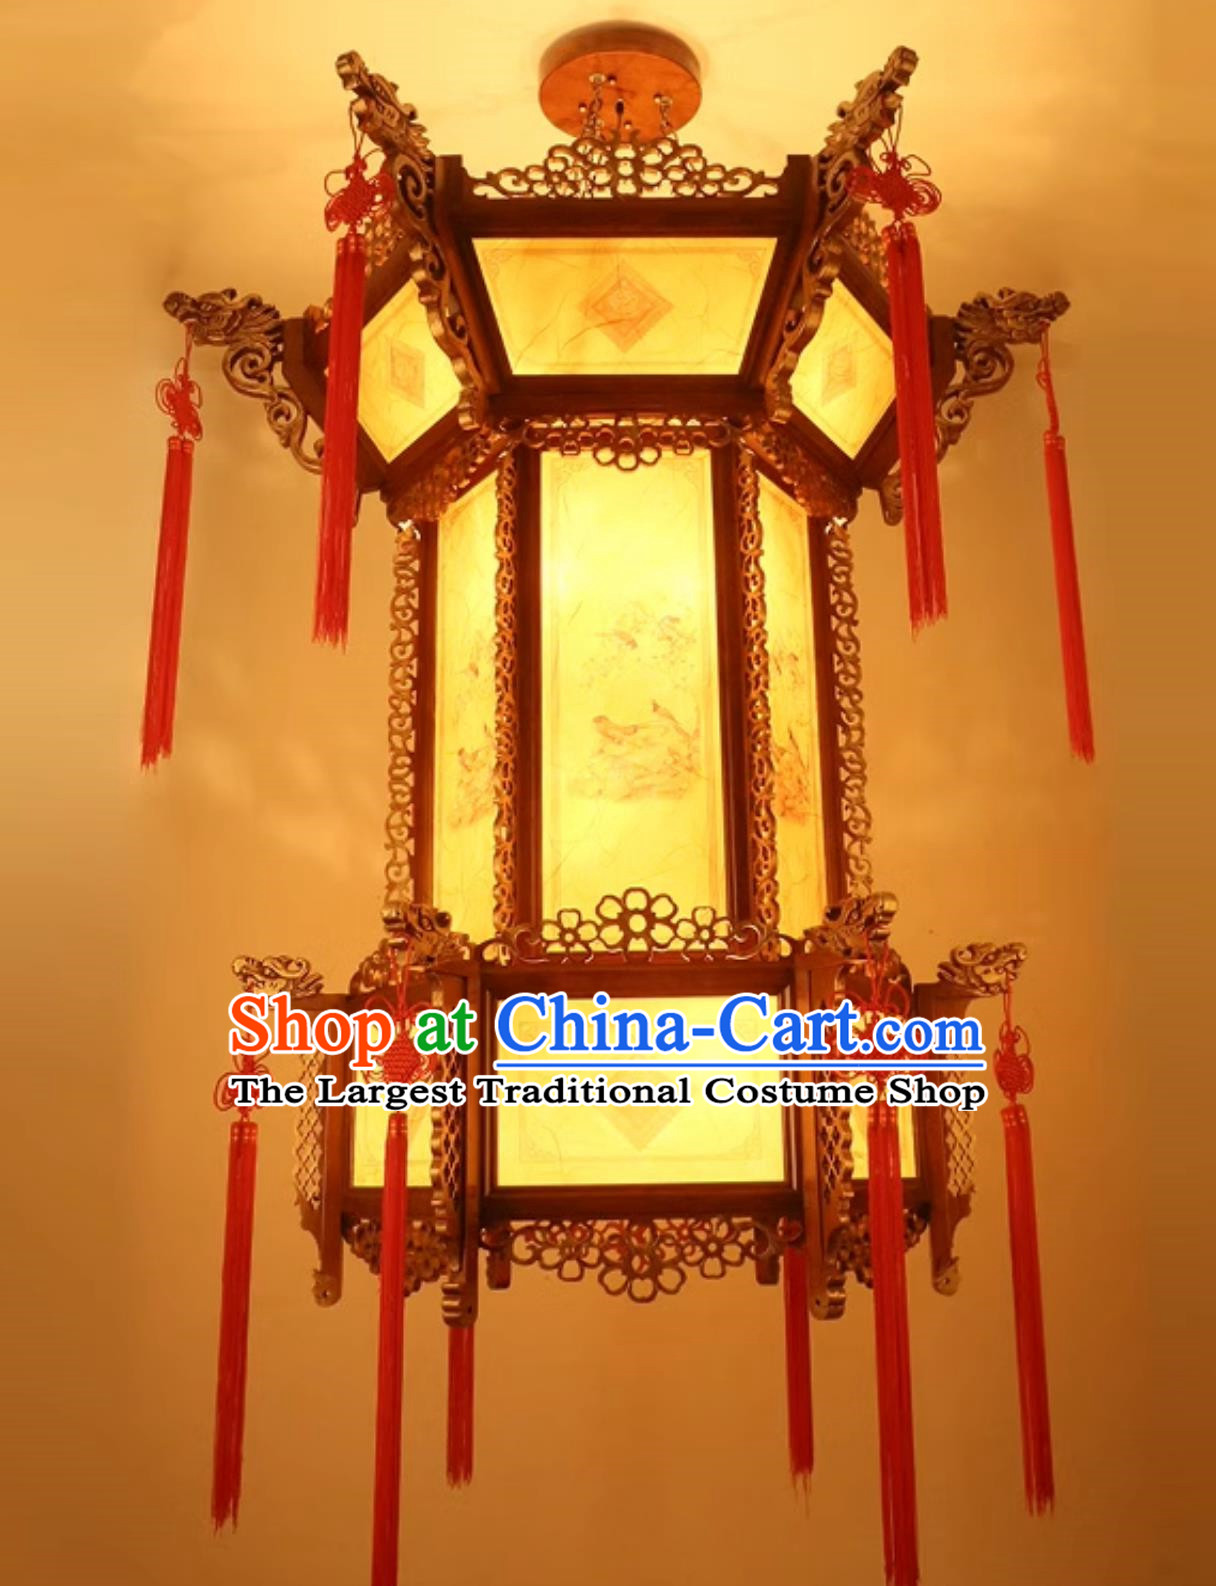 57 Inches Diameter Chinese Antique Lantern Villa Living Room Large Chandelier Classical Solid Wood Hexagonal Faucet Palace Lantern Hotel Chandelier